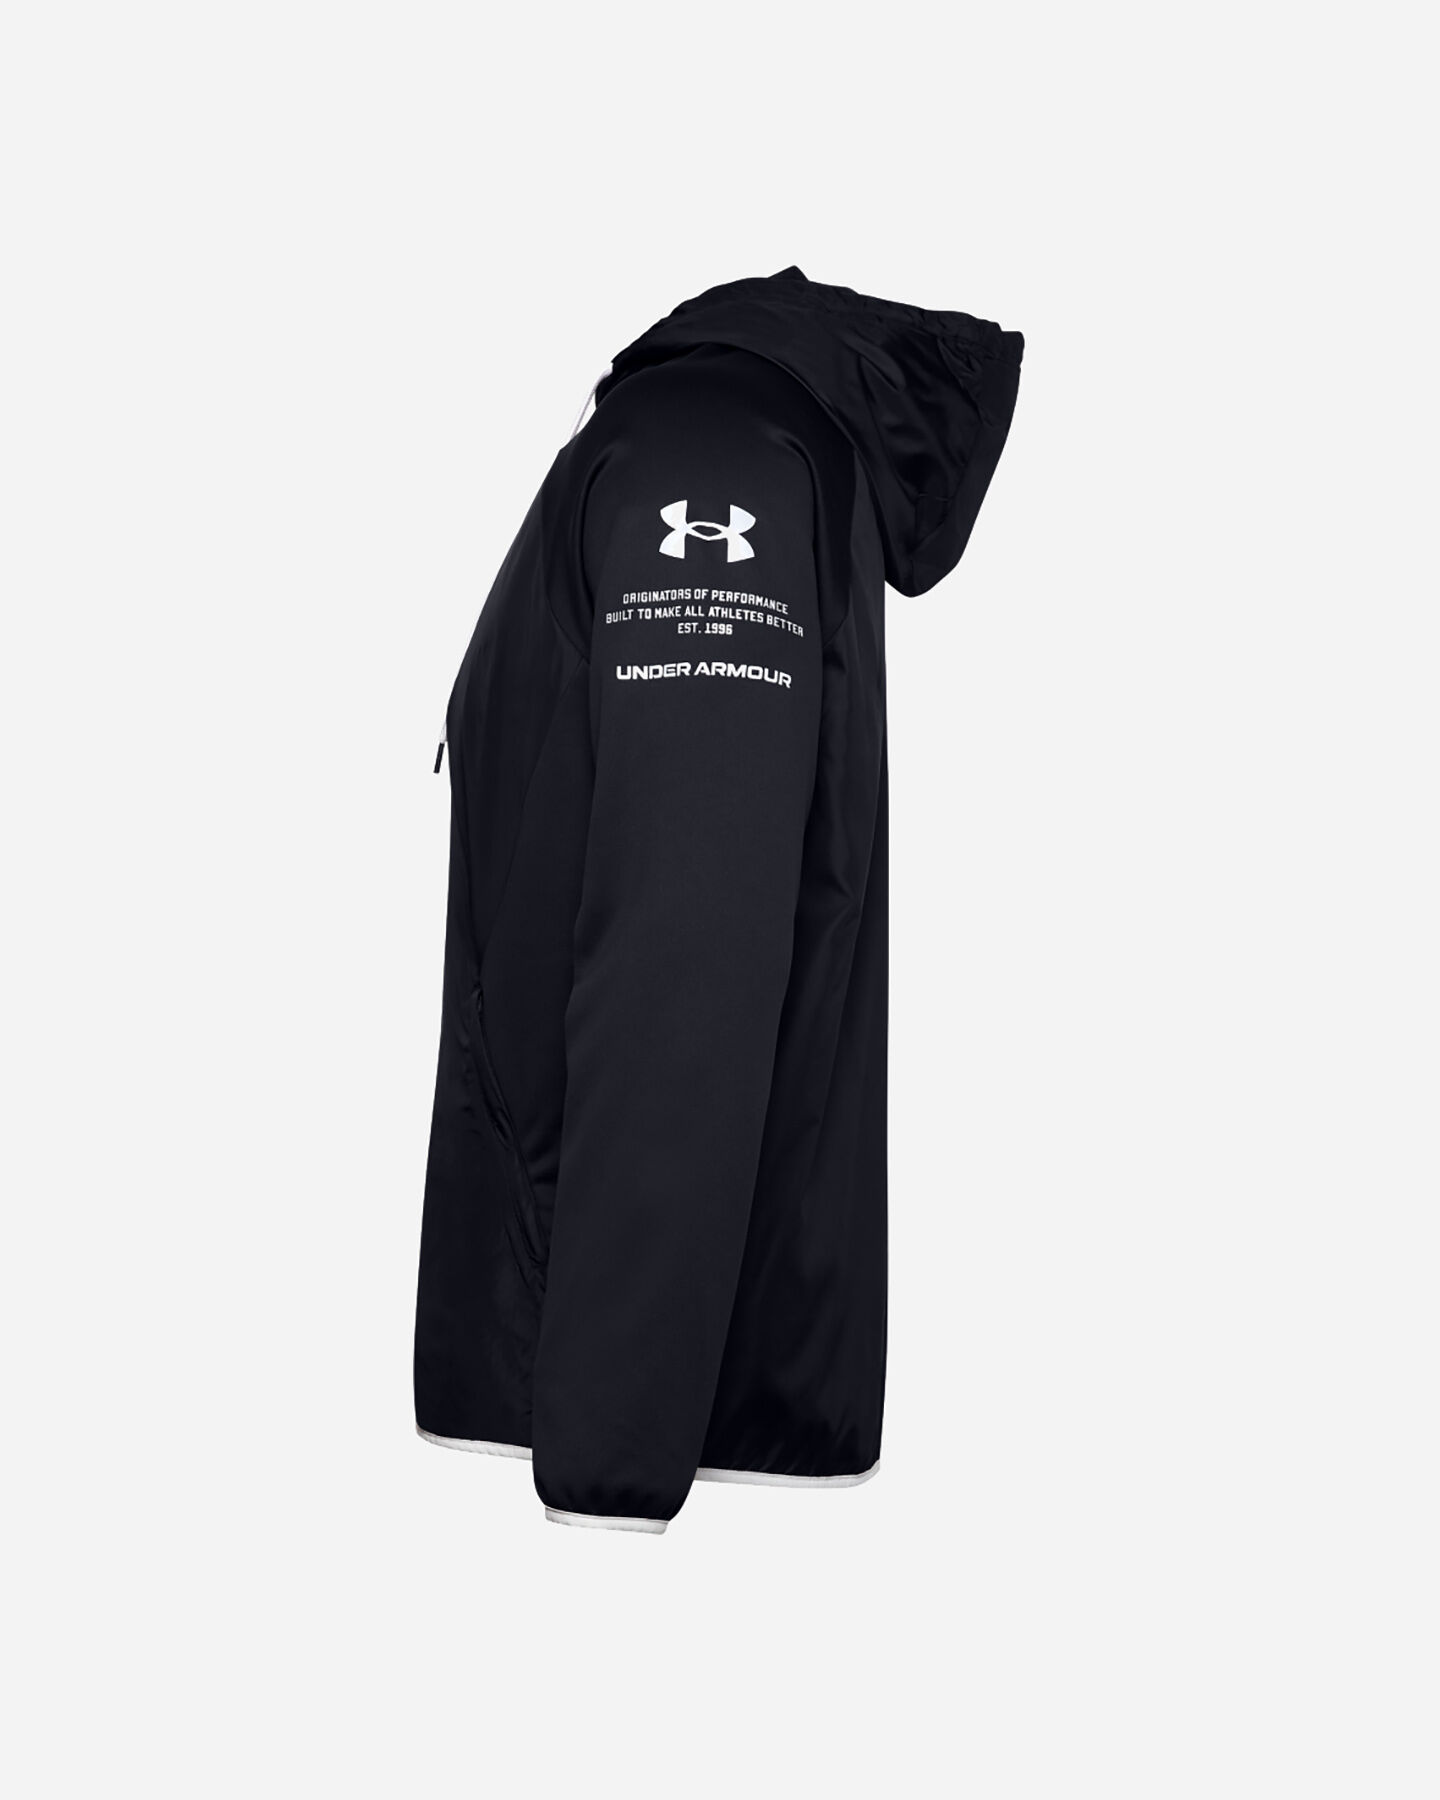  Felpa UNDER ARMOUR STORM M S5229570|0001|XS scatto 1